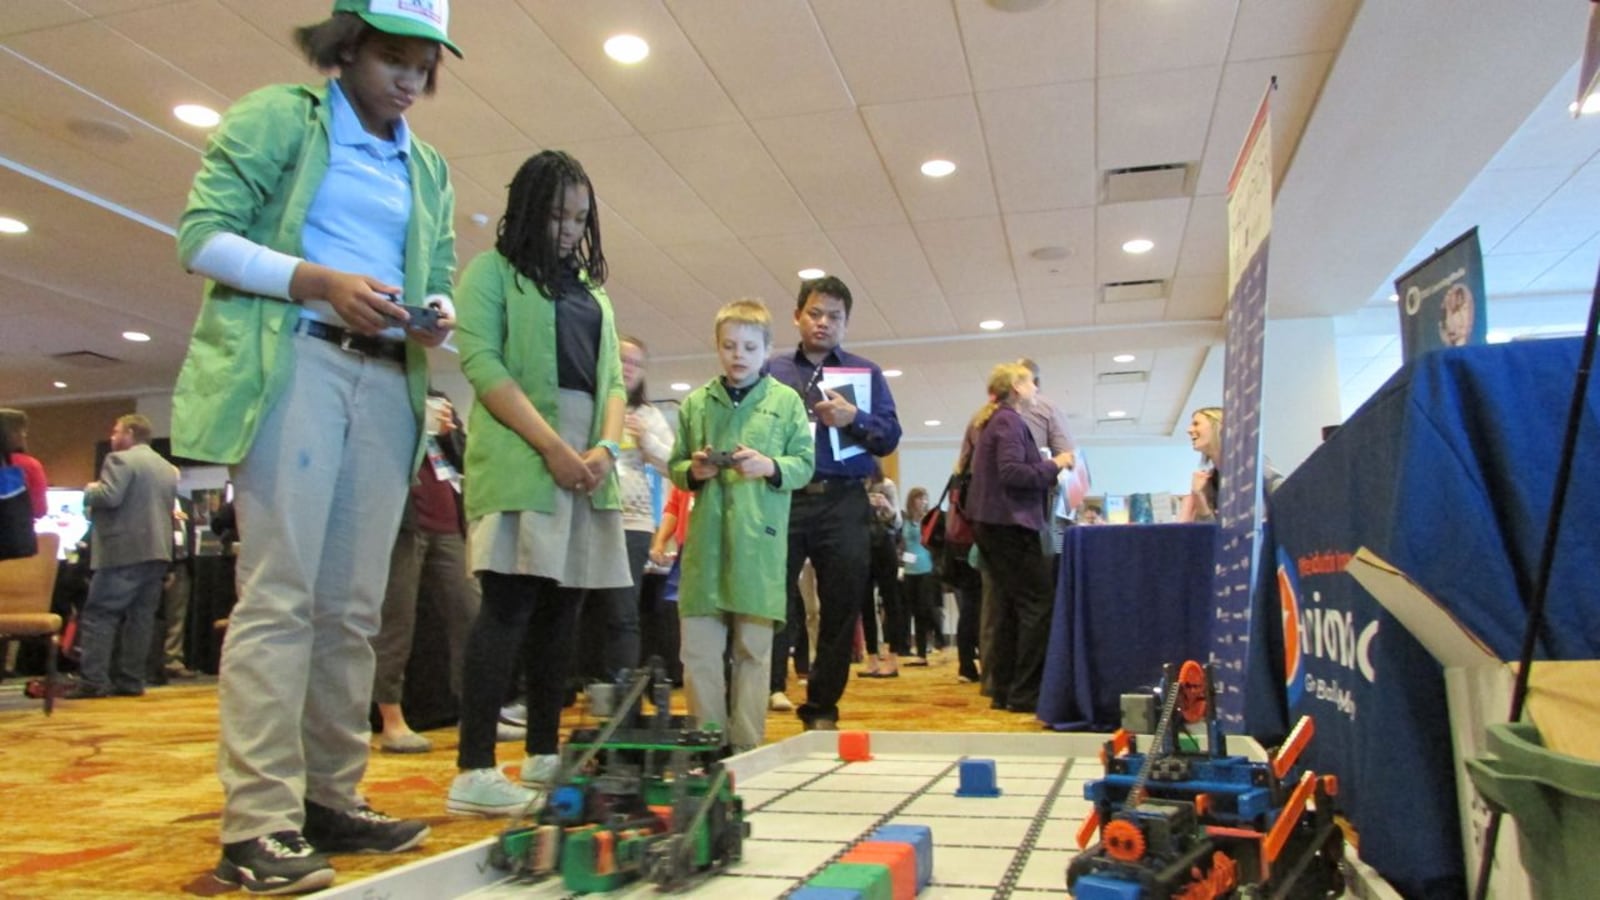 Students from Paramount School of Excellence's robotics team show off their skills at the Indiana Afterschool Network's Summit on Out of School Learning at the JW Marriott hotel in Indianapolis.